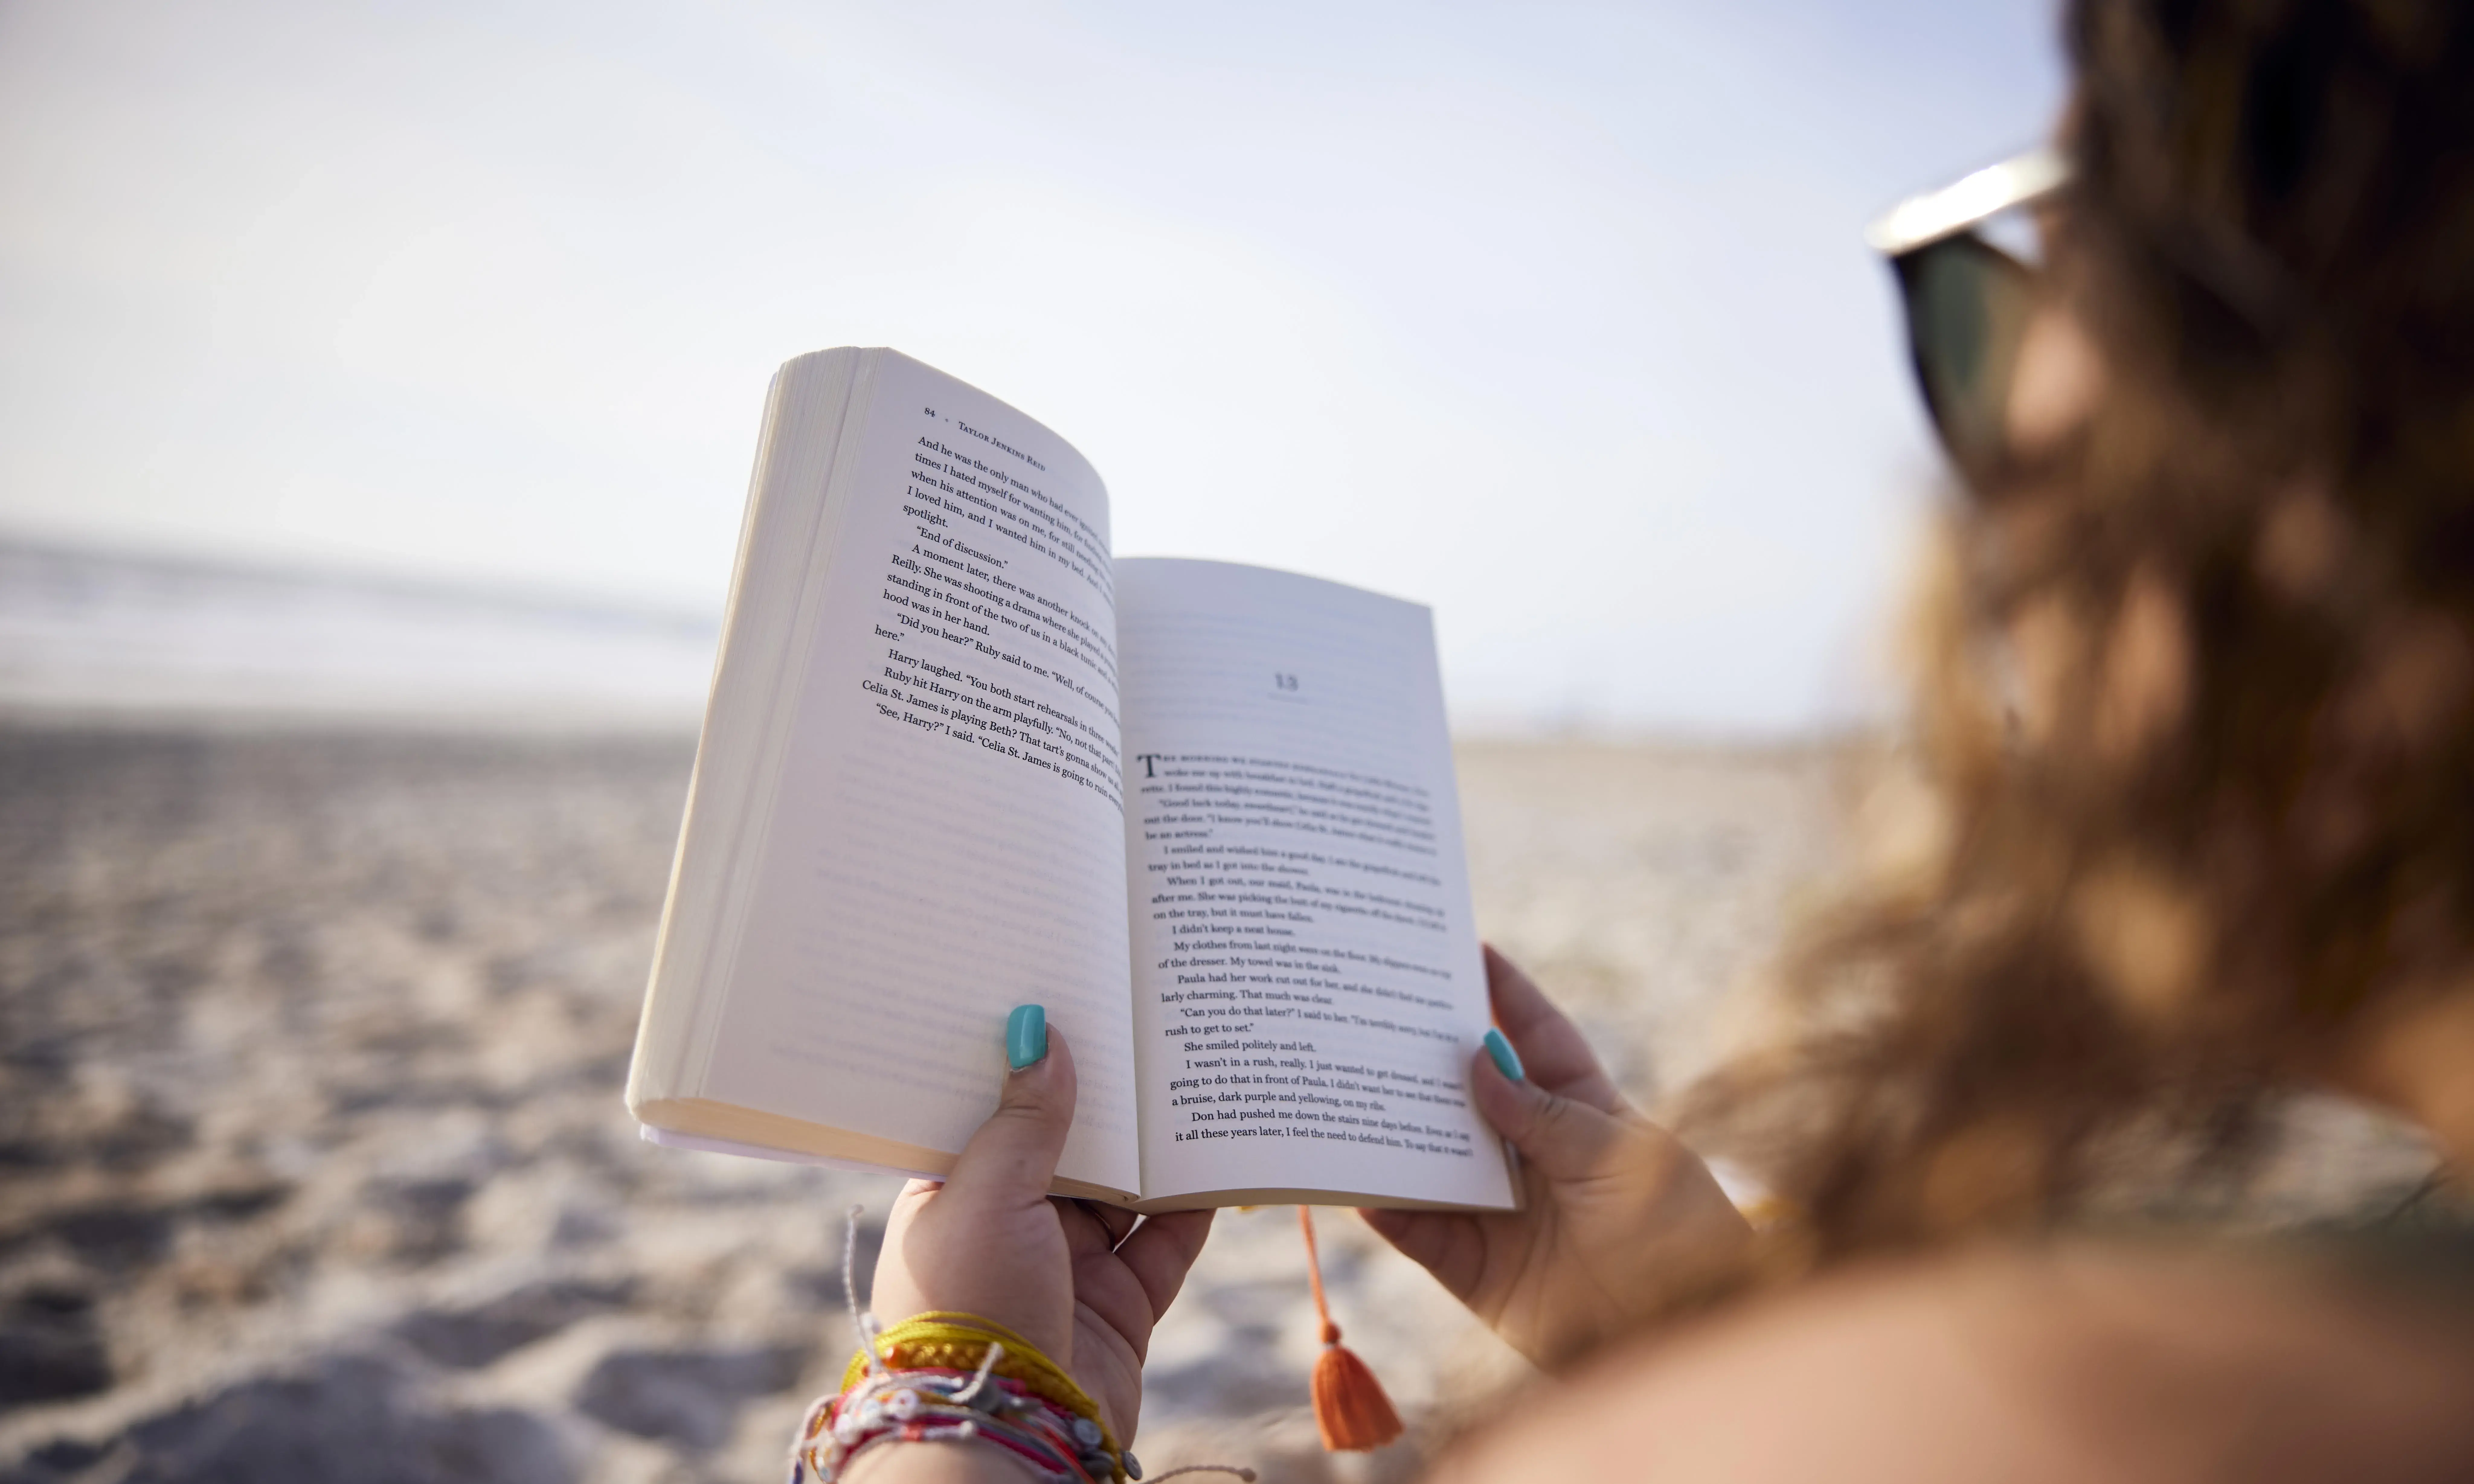 Student reading a book on the beach.